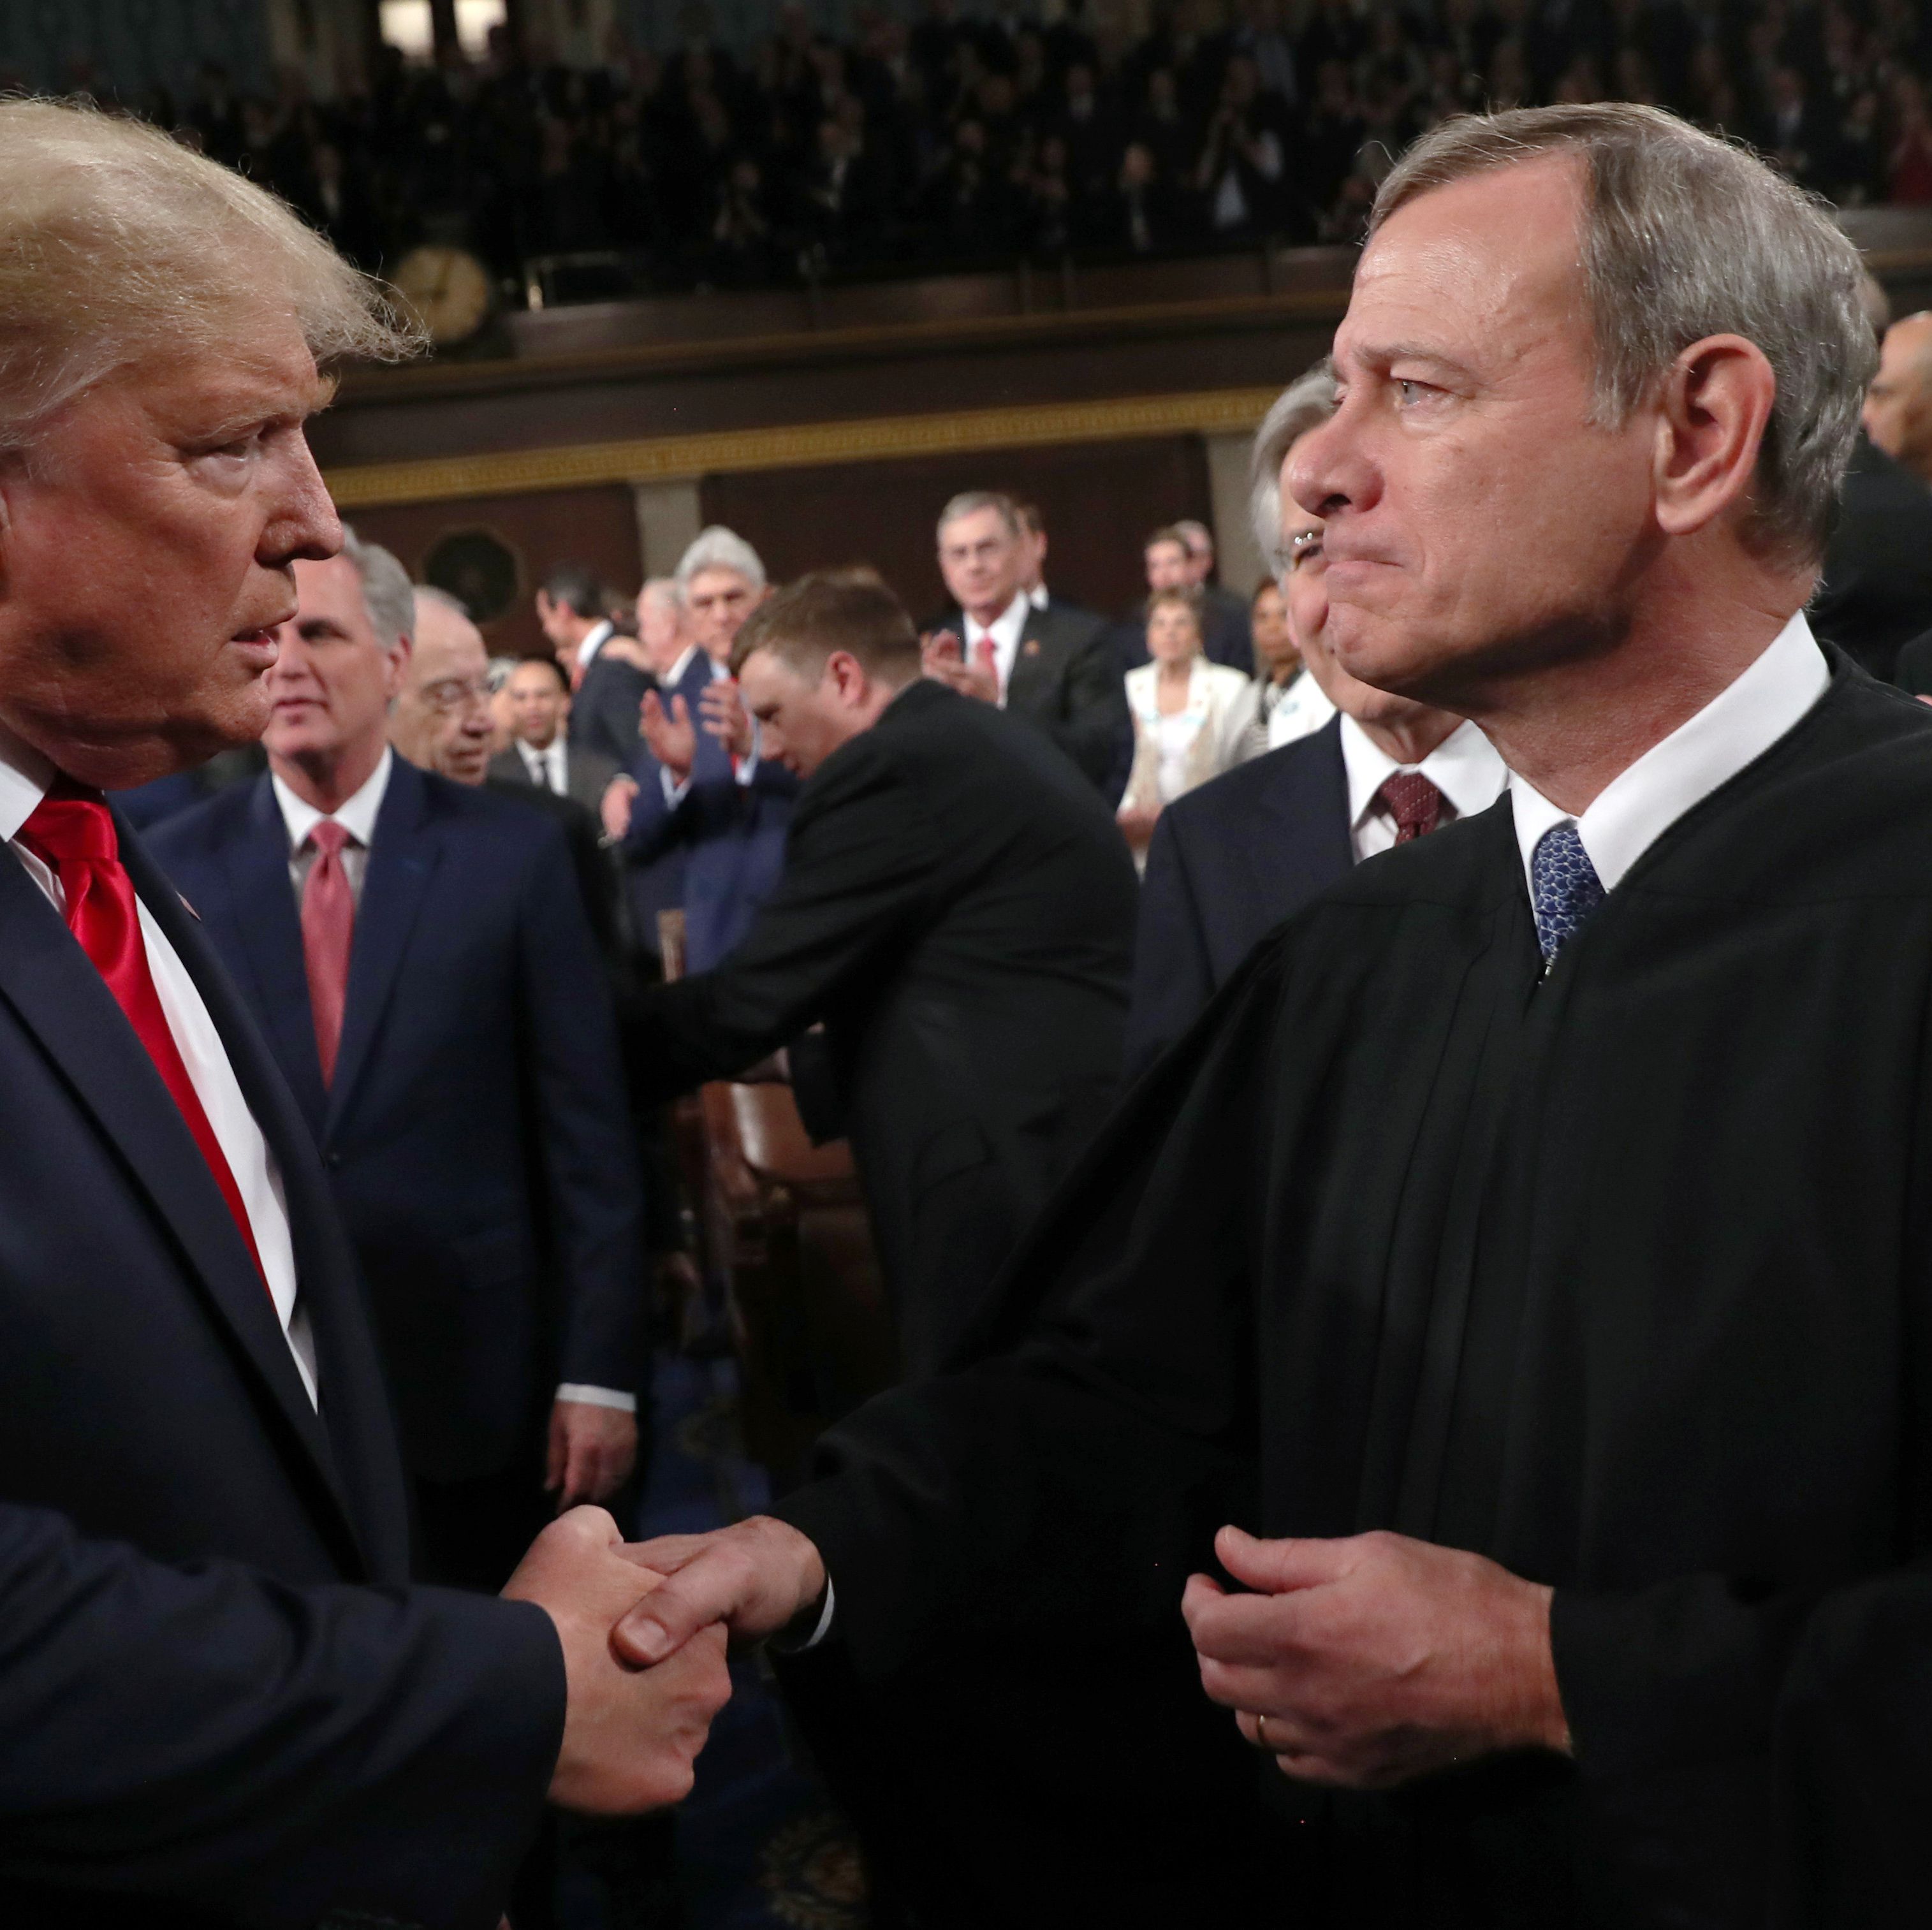 John Roberts's Meddling in the Trump Tax Case May Doom his 'Institutionalist' Cred